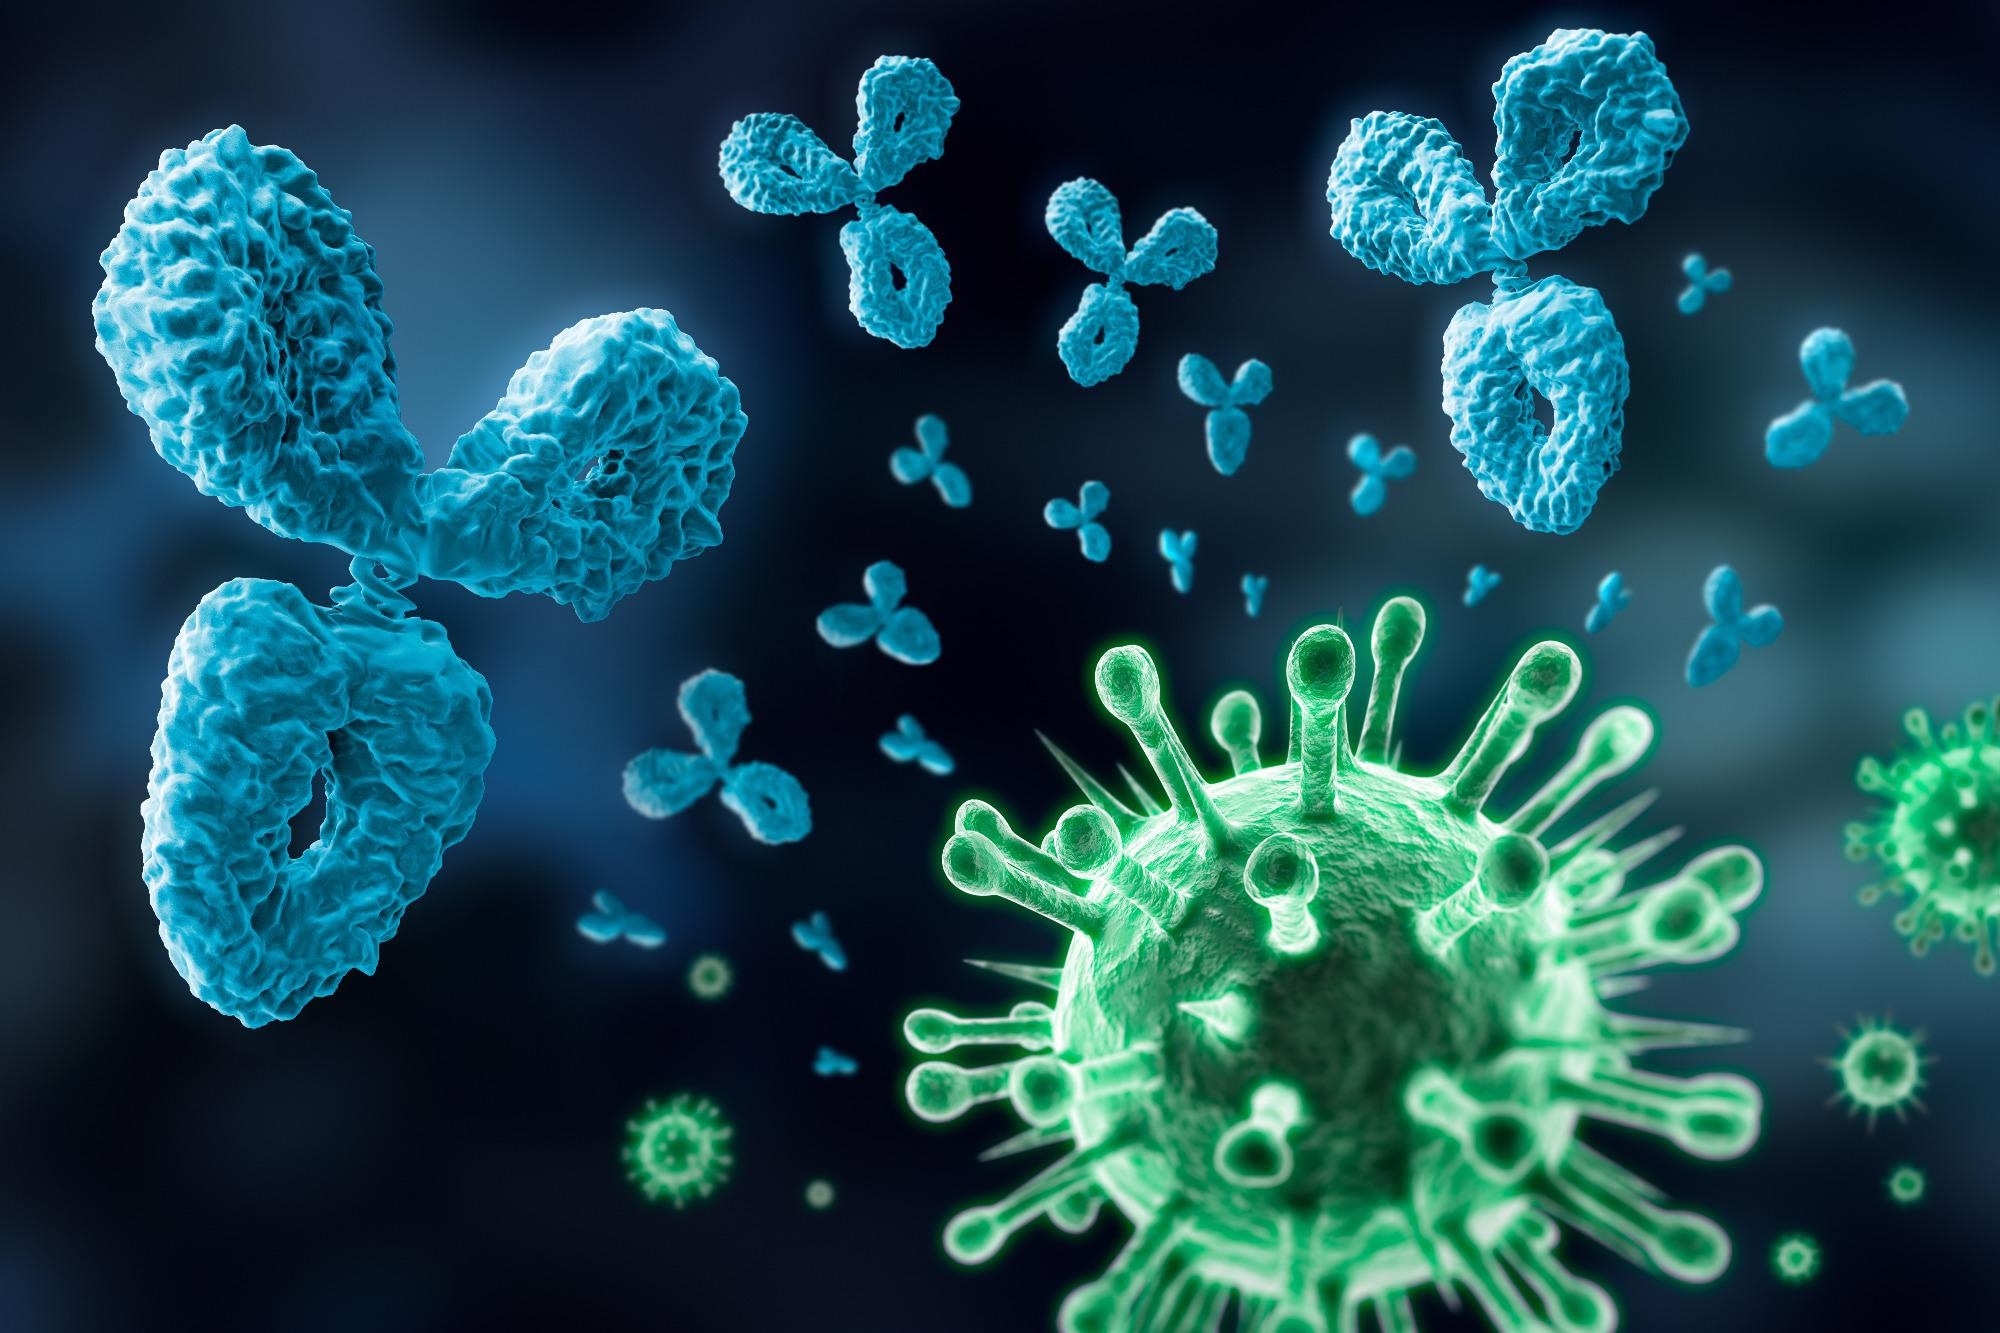 Study: Neutralization of Omicron sublineages and Deltacron SARS-CoV-2 by 3 doses of BNT162b2 vaccine or BA.1 infection. Image Credit: peterschreiber media / Shutterstock